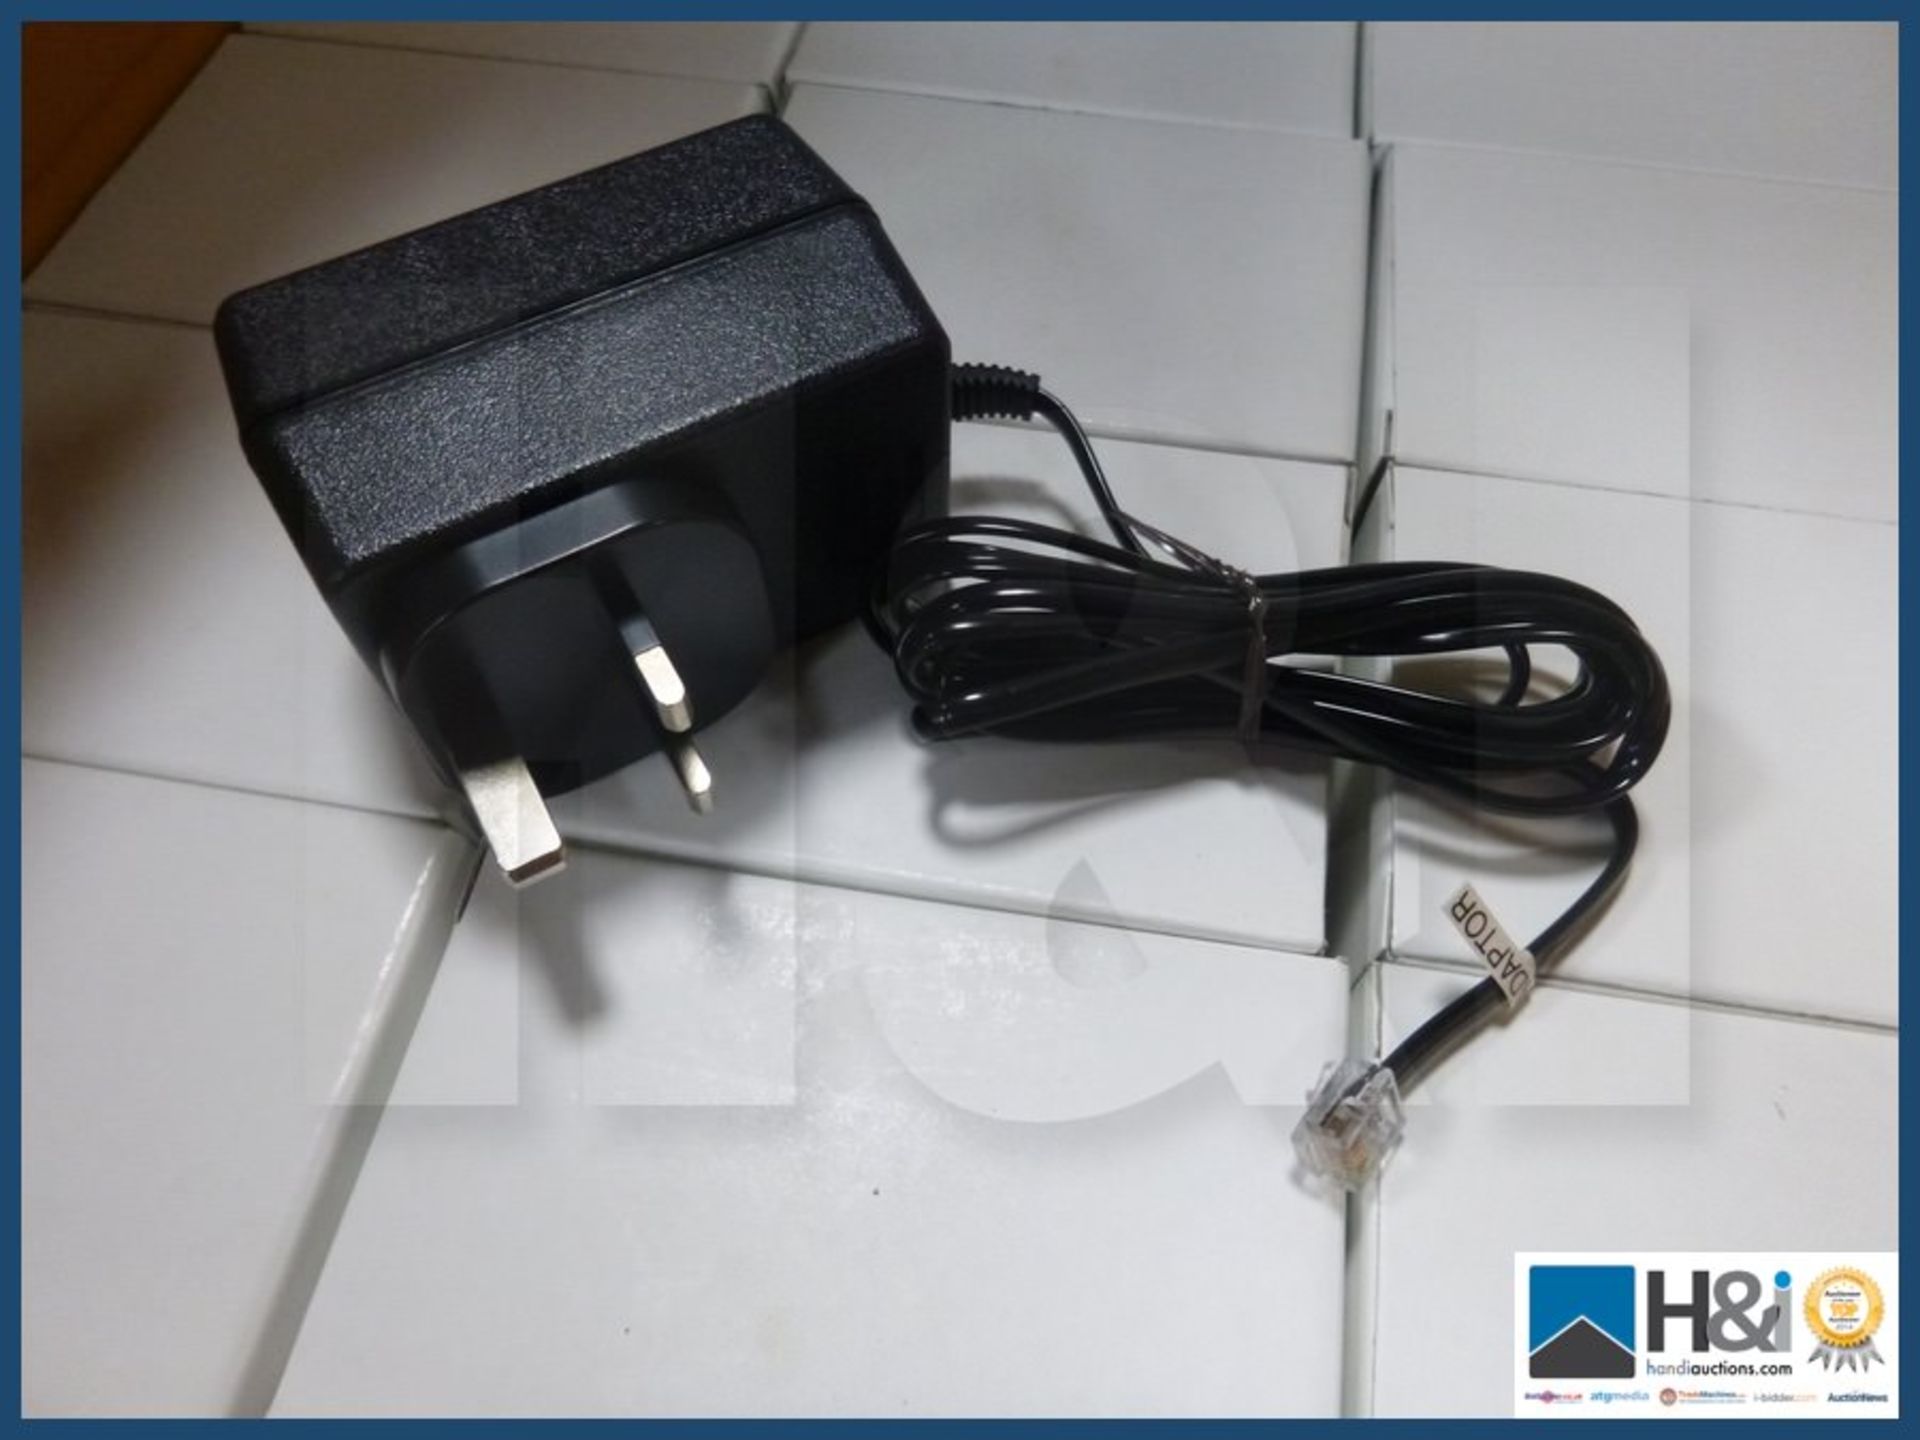 8v/300mA + 9v/ 200mA power supply with rj11 output lead X 36 pcs. NO VAT on item except on buyers pr - Image 2 of 2